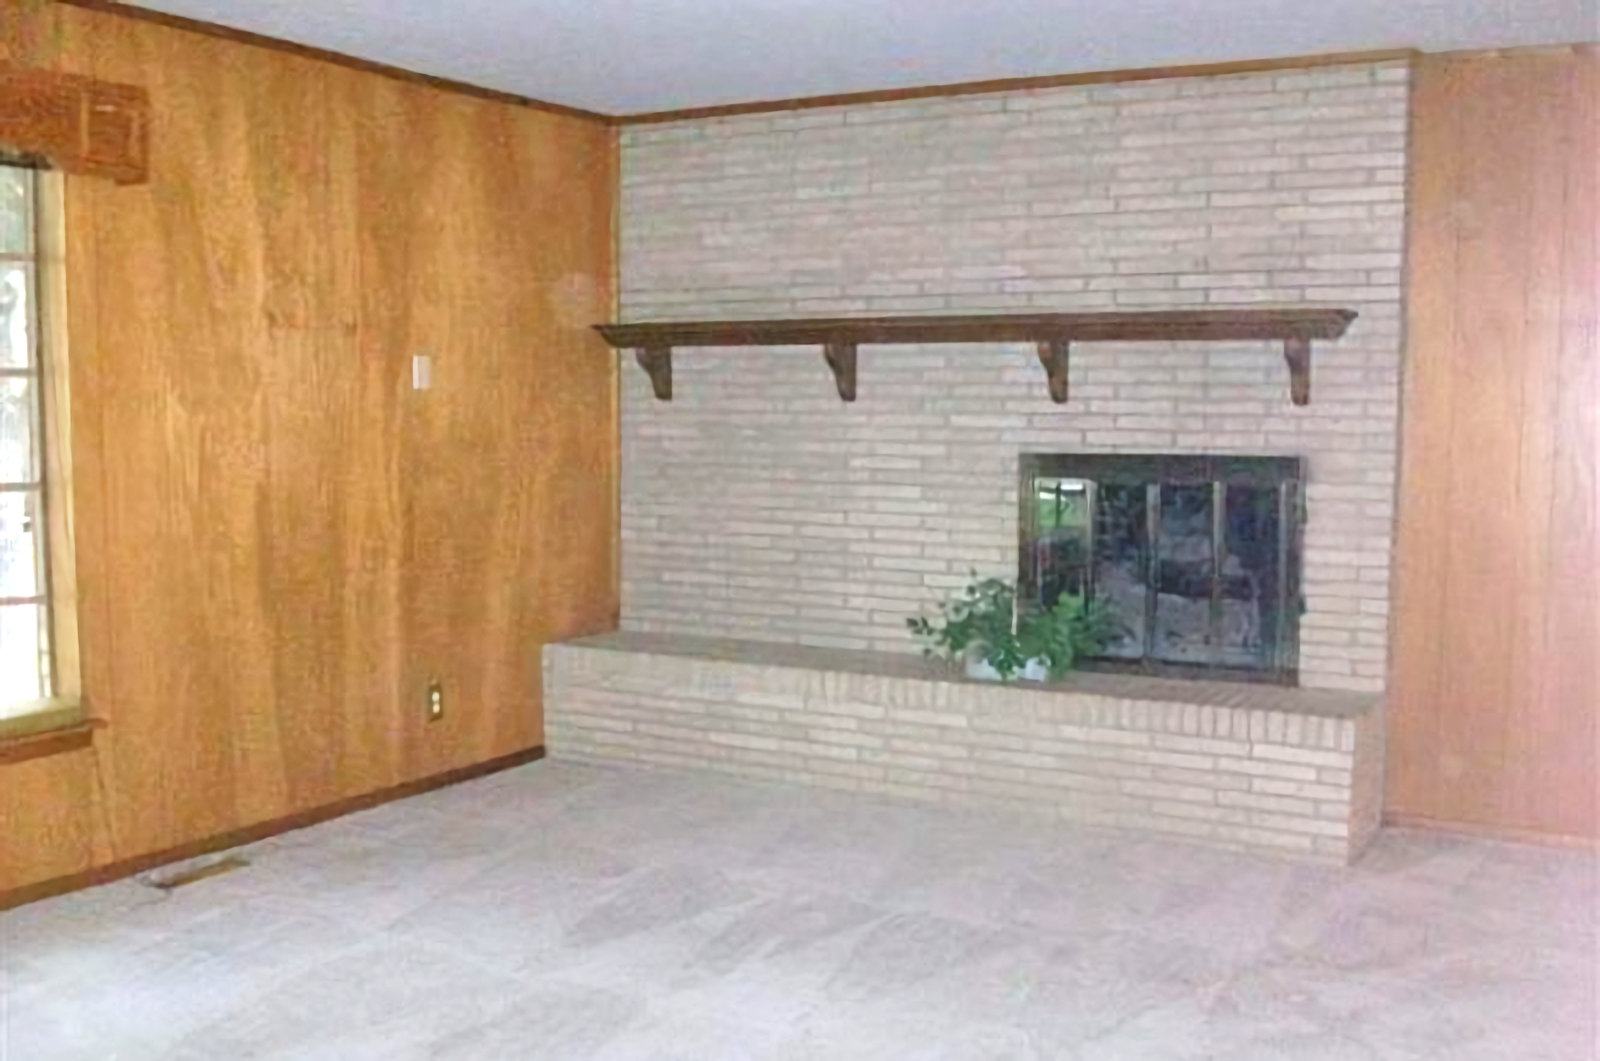 Reader Question: How Can I Build Symmetrical Bookcases Around This Fireplace?